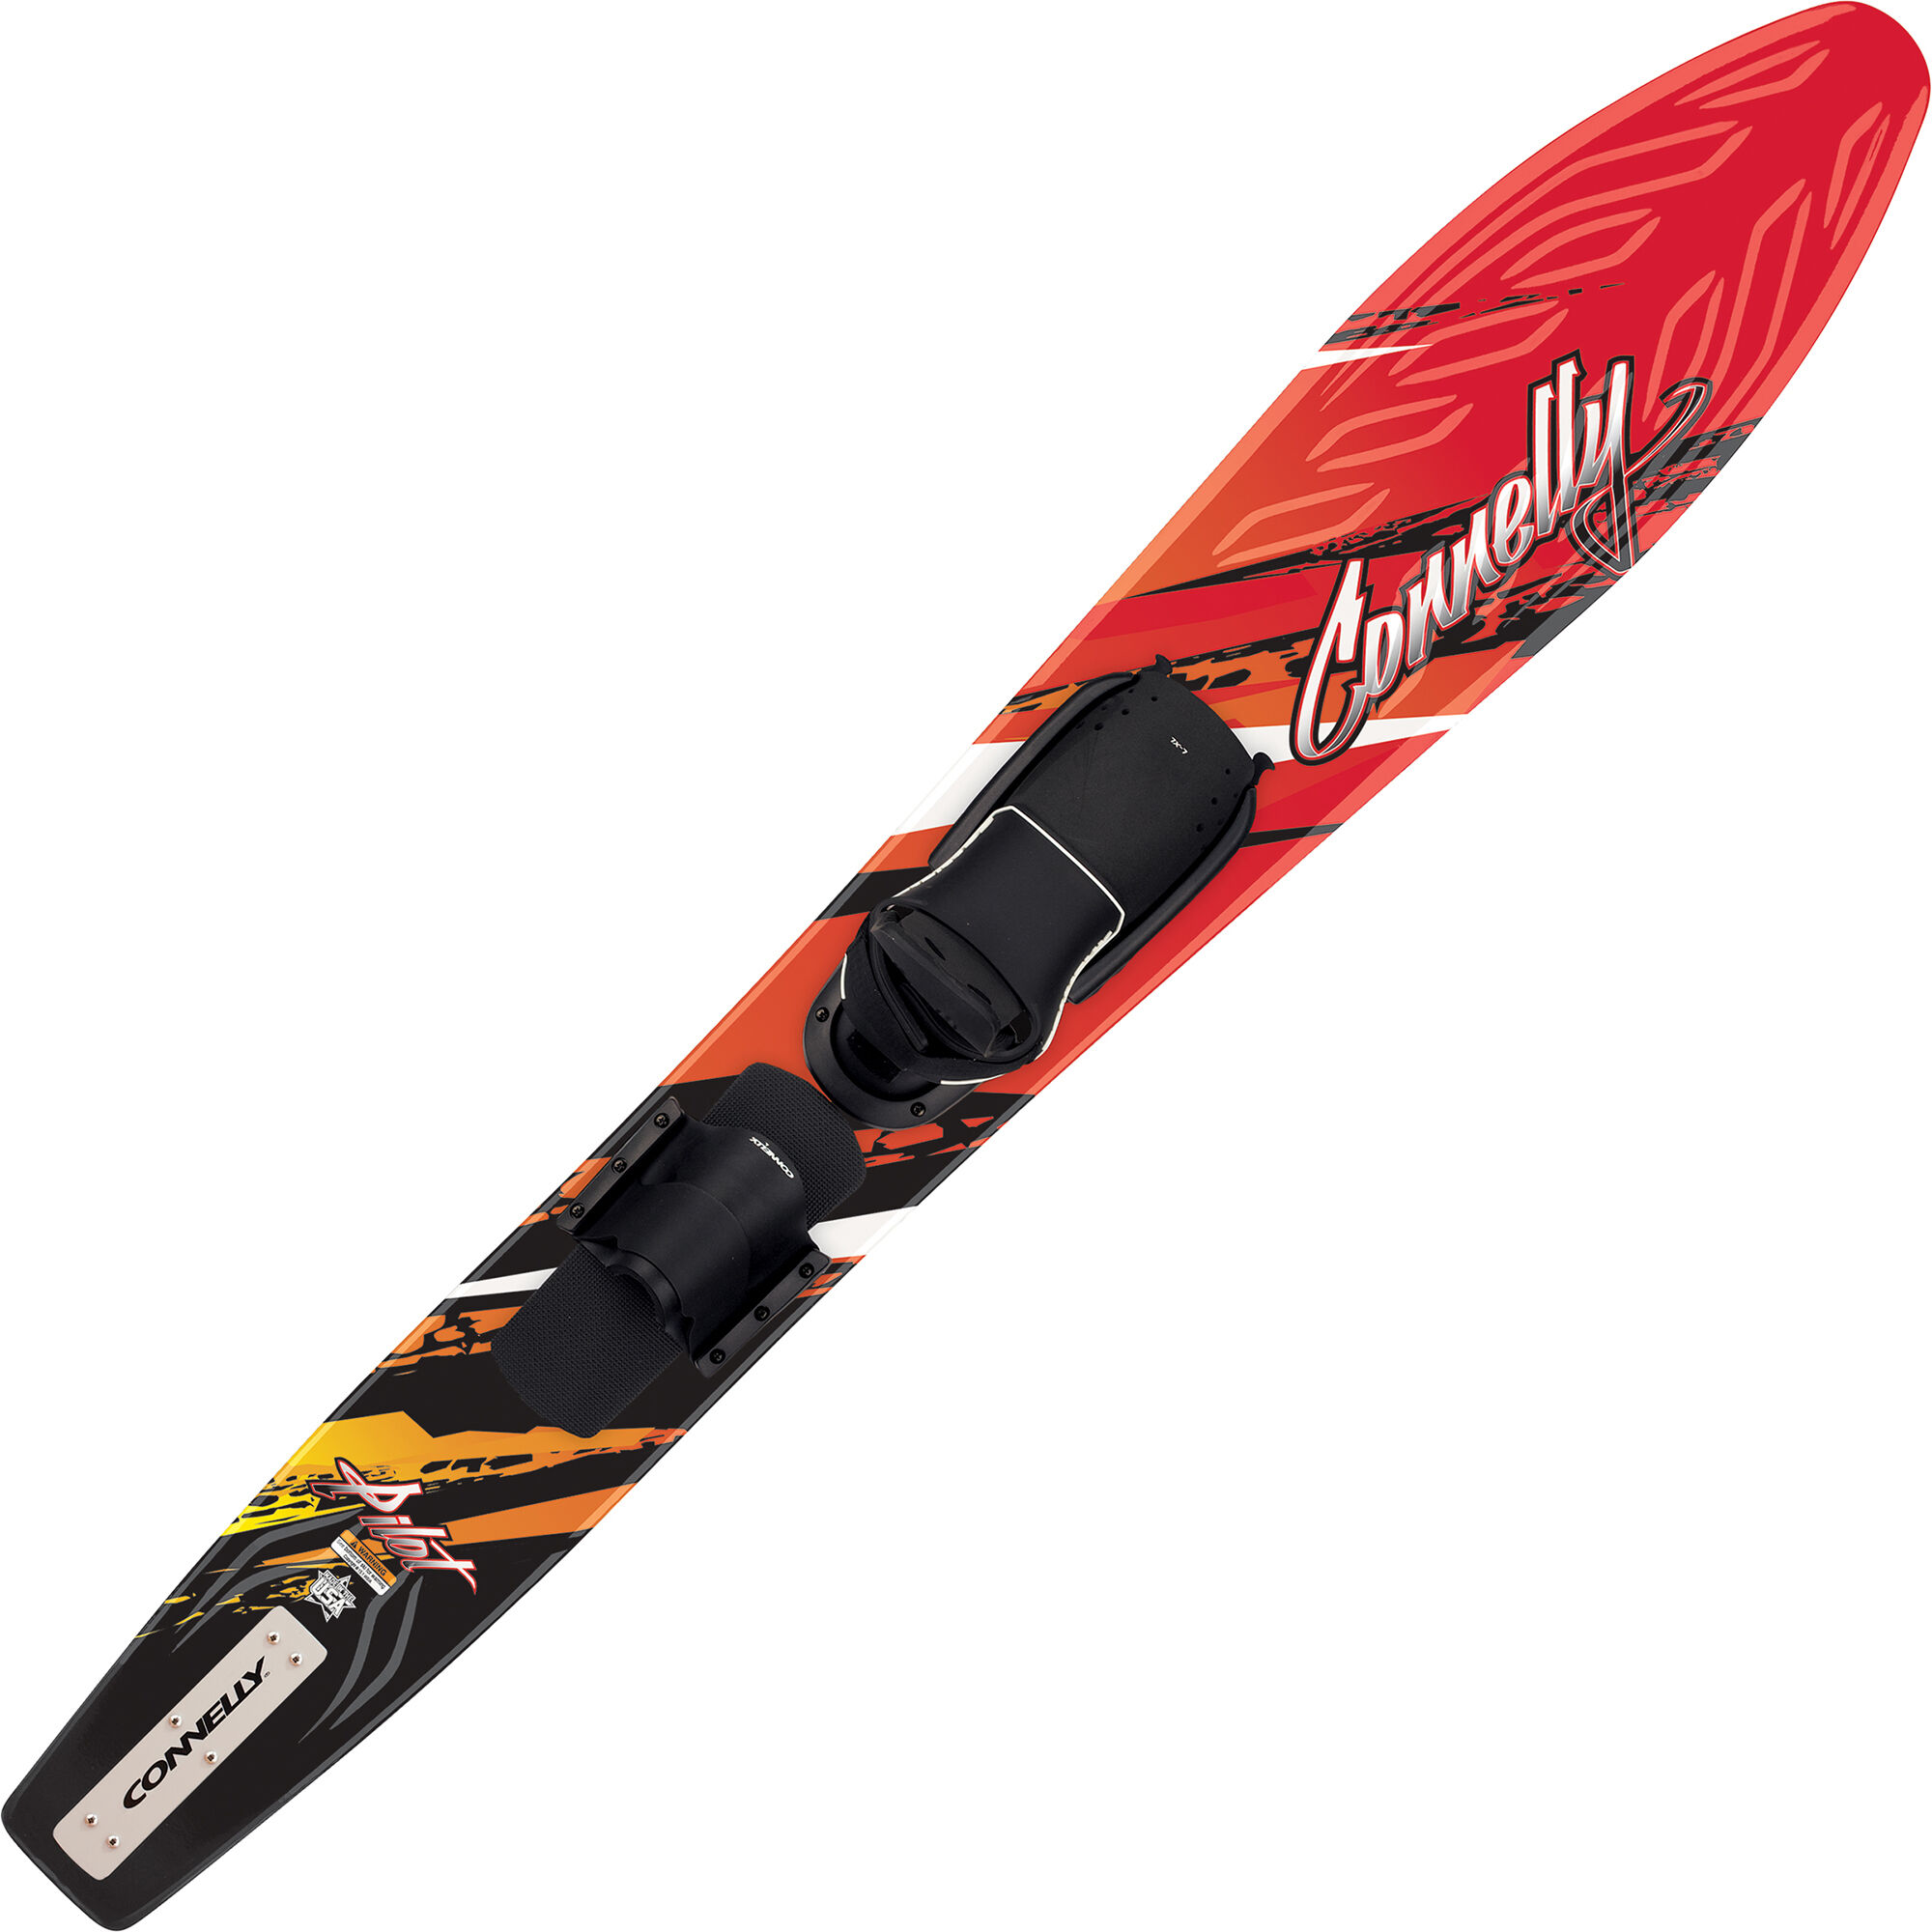 Connelly Pilot Slalom Ski With Adjustable Binding And Rear Toe